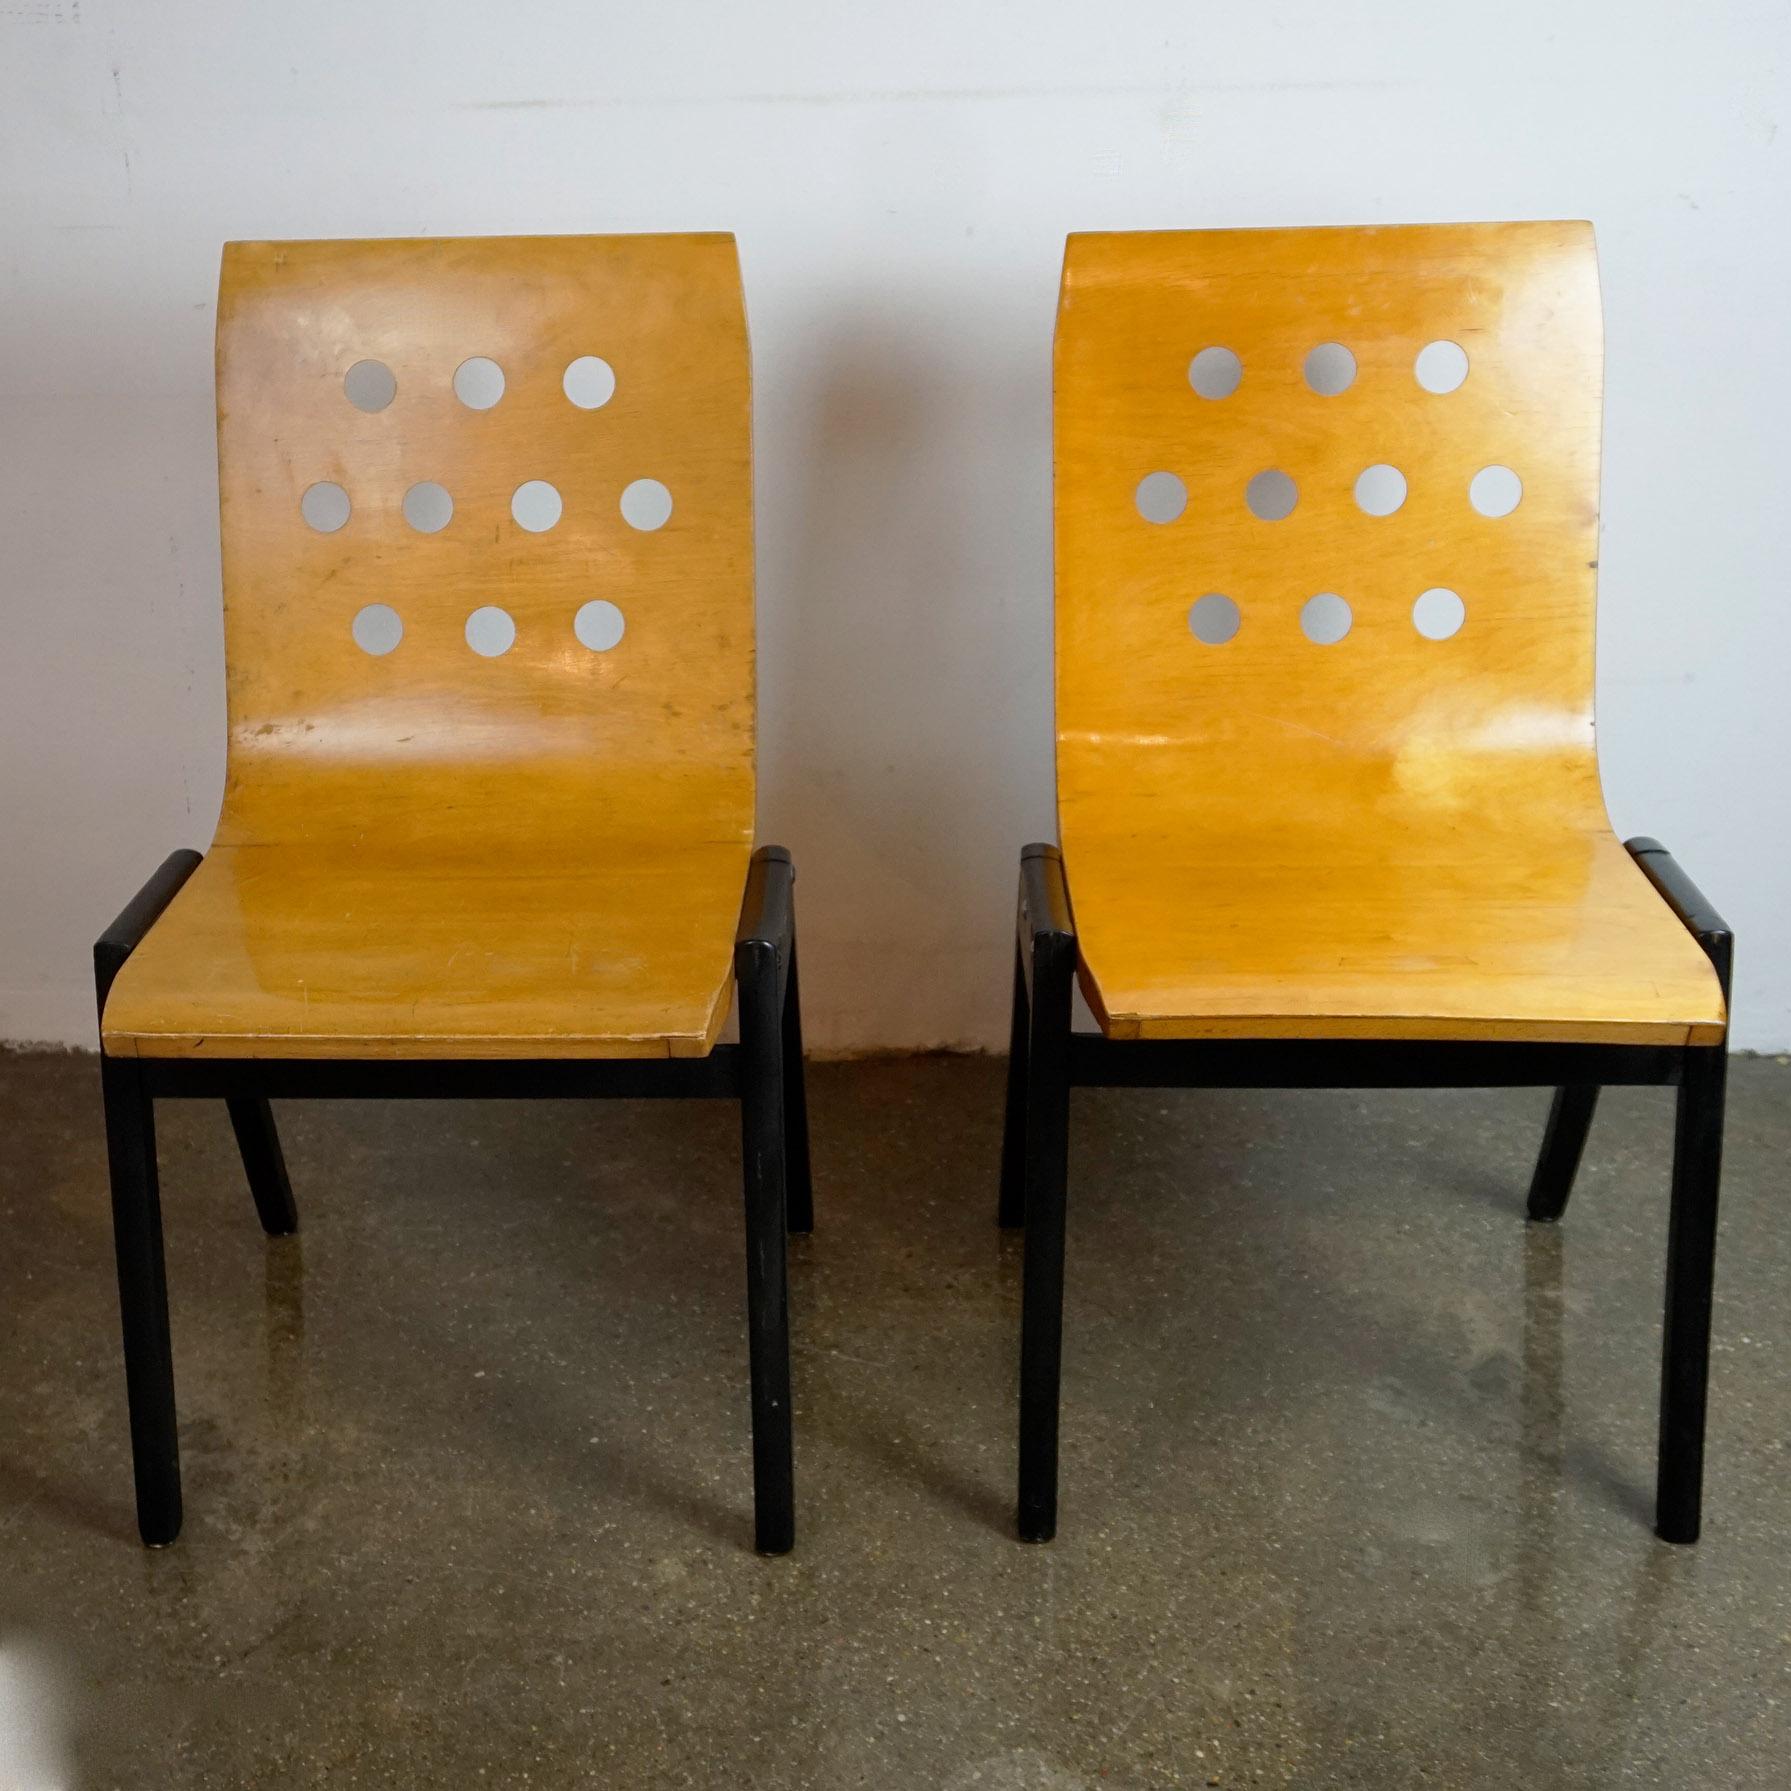 A set of two stackable beech plywood chairs designed by Prof. Roland Rainer in 1951.
Roland Rainer used these chairs for the Viennese city hall, Wiener Stadthalle in 1956-1962. The chair was named after that as the well-known 